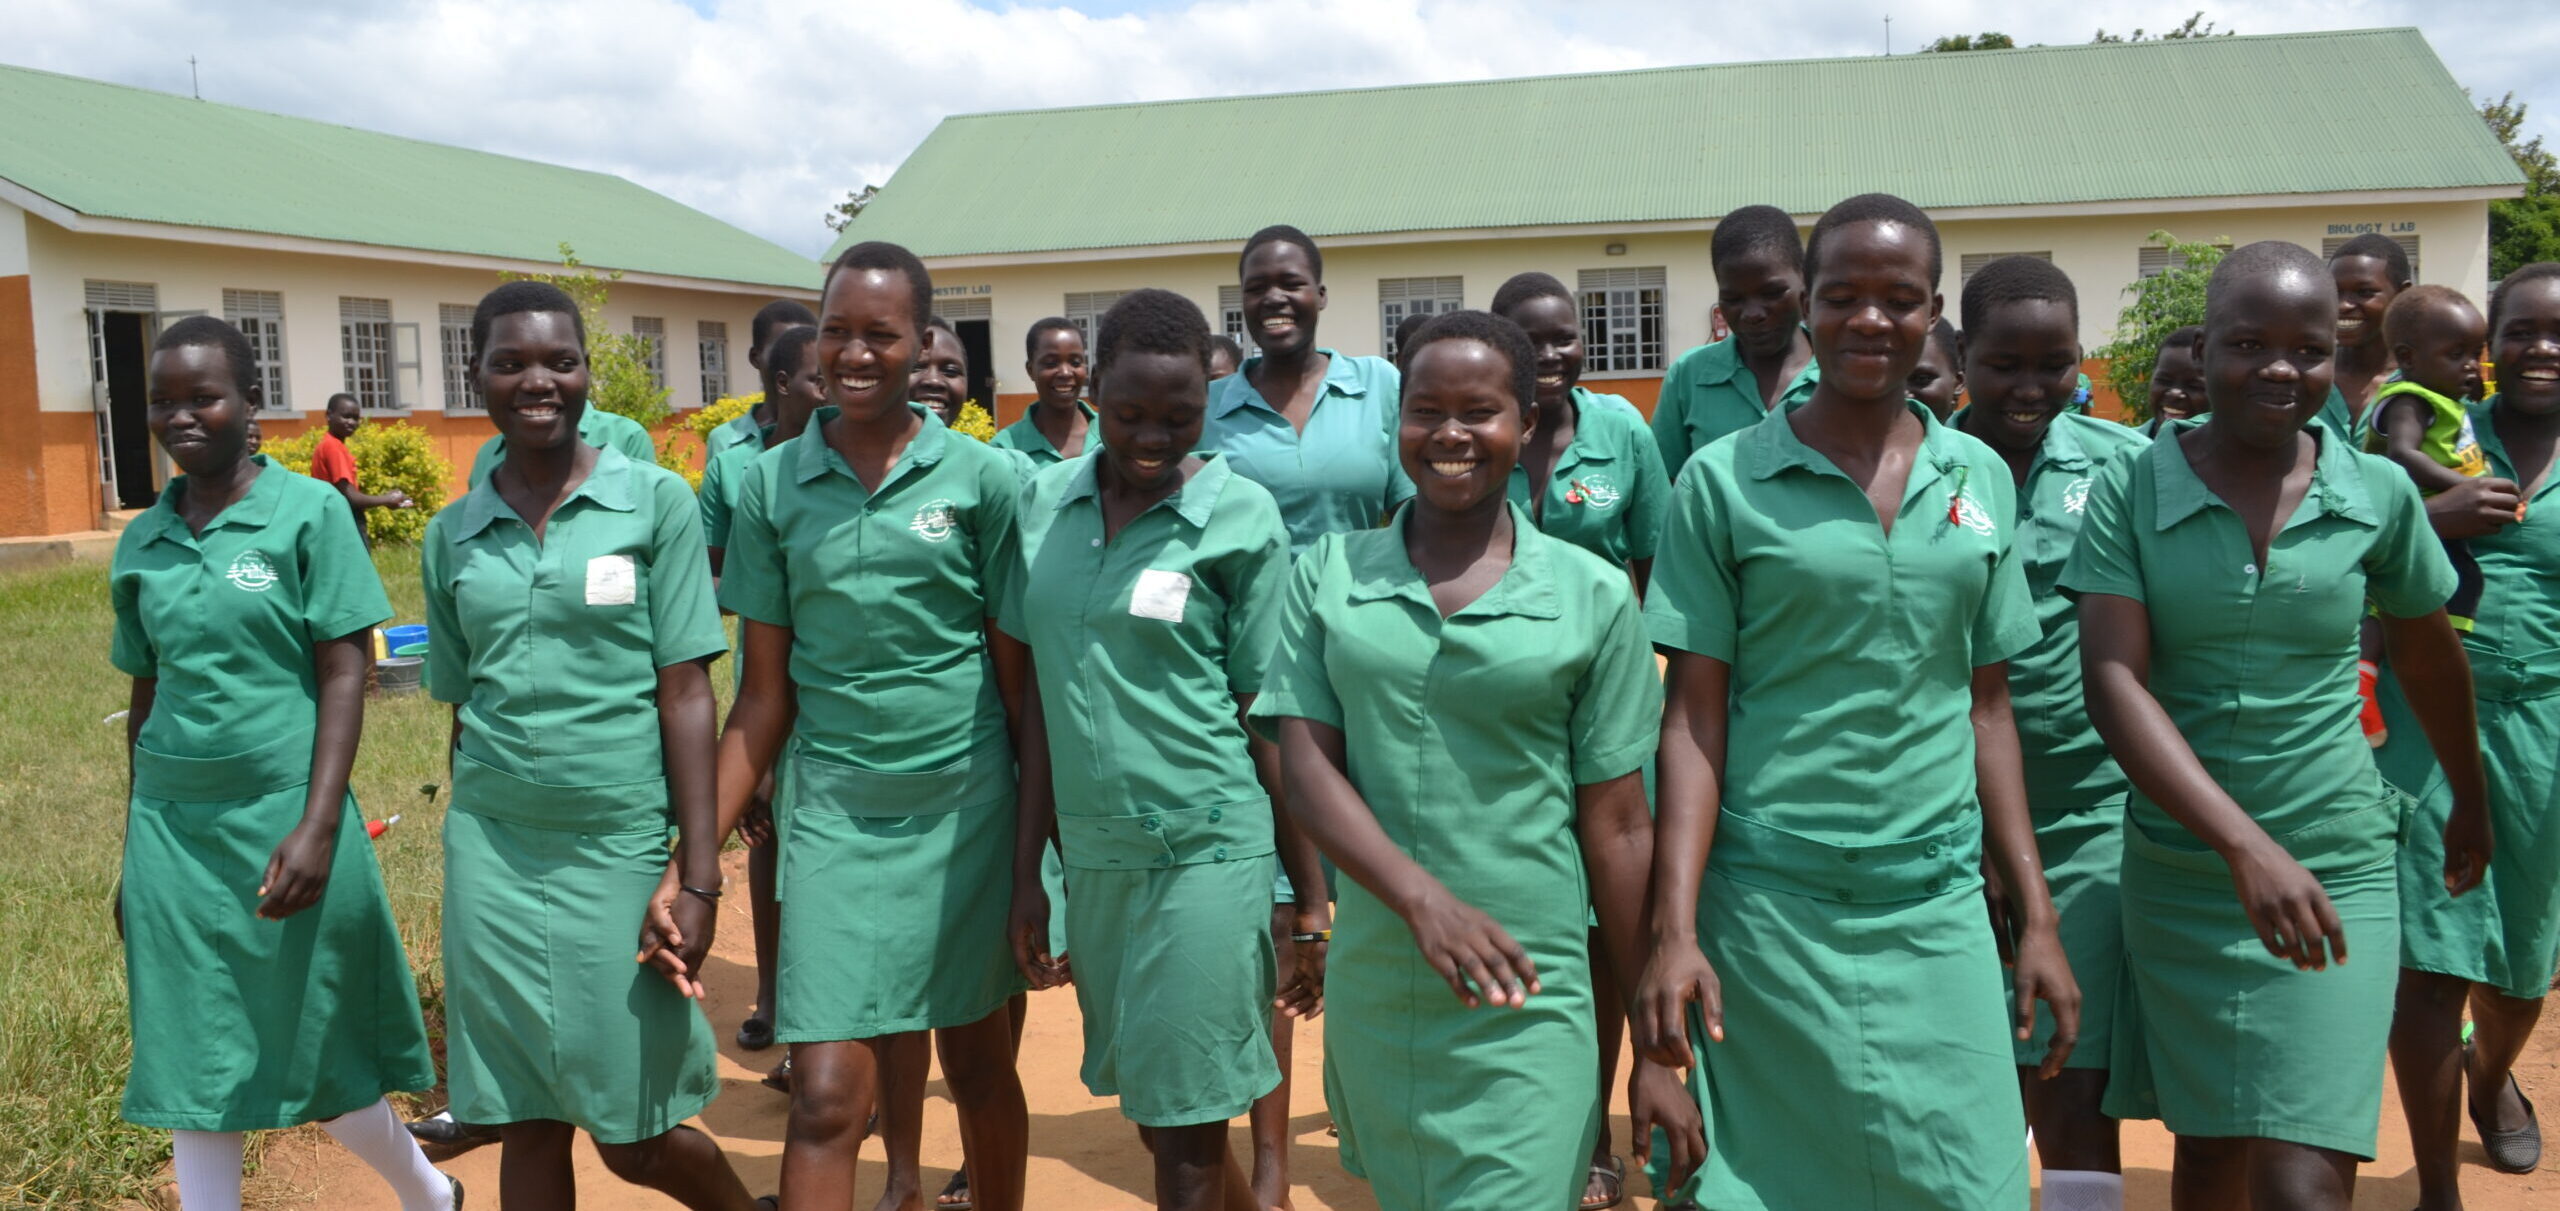 Girls smile and walk together, all wear green uniforms.